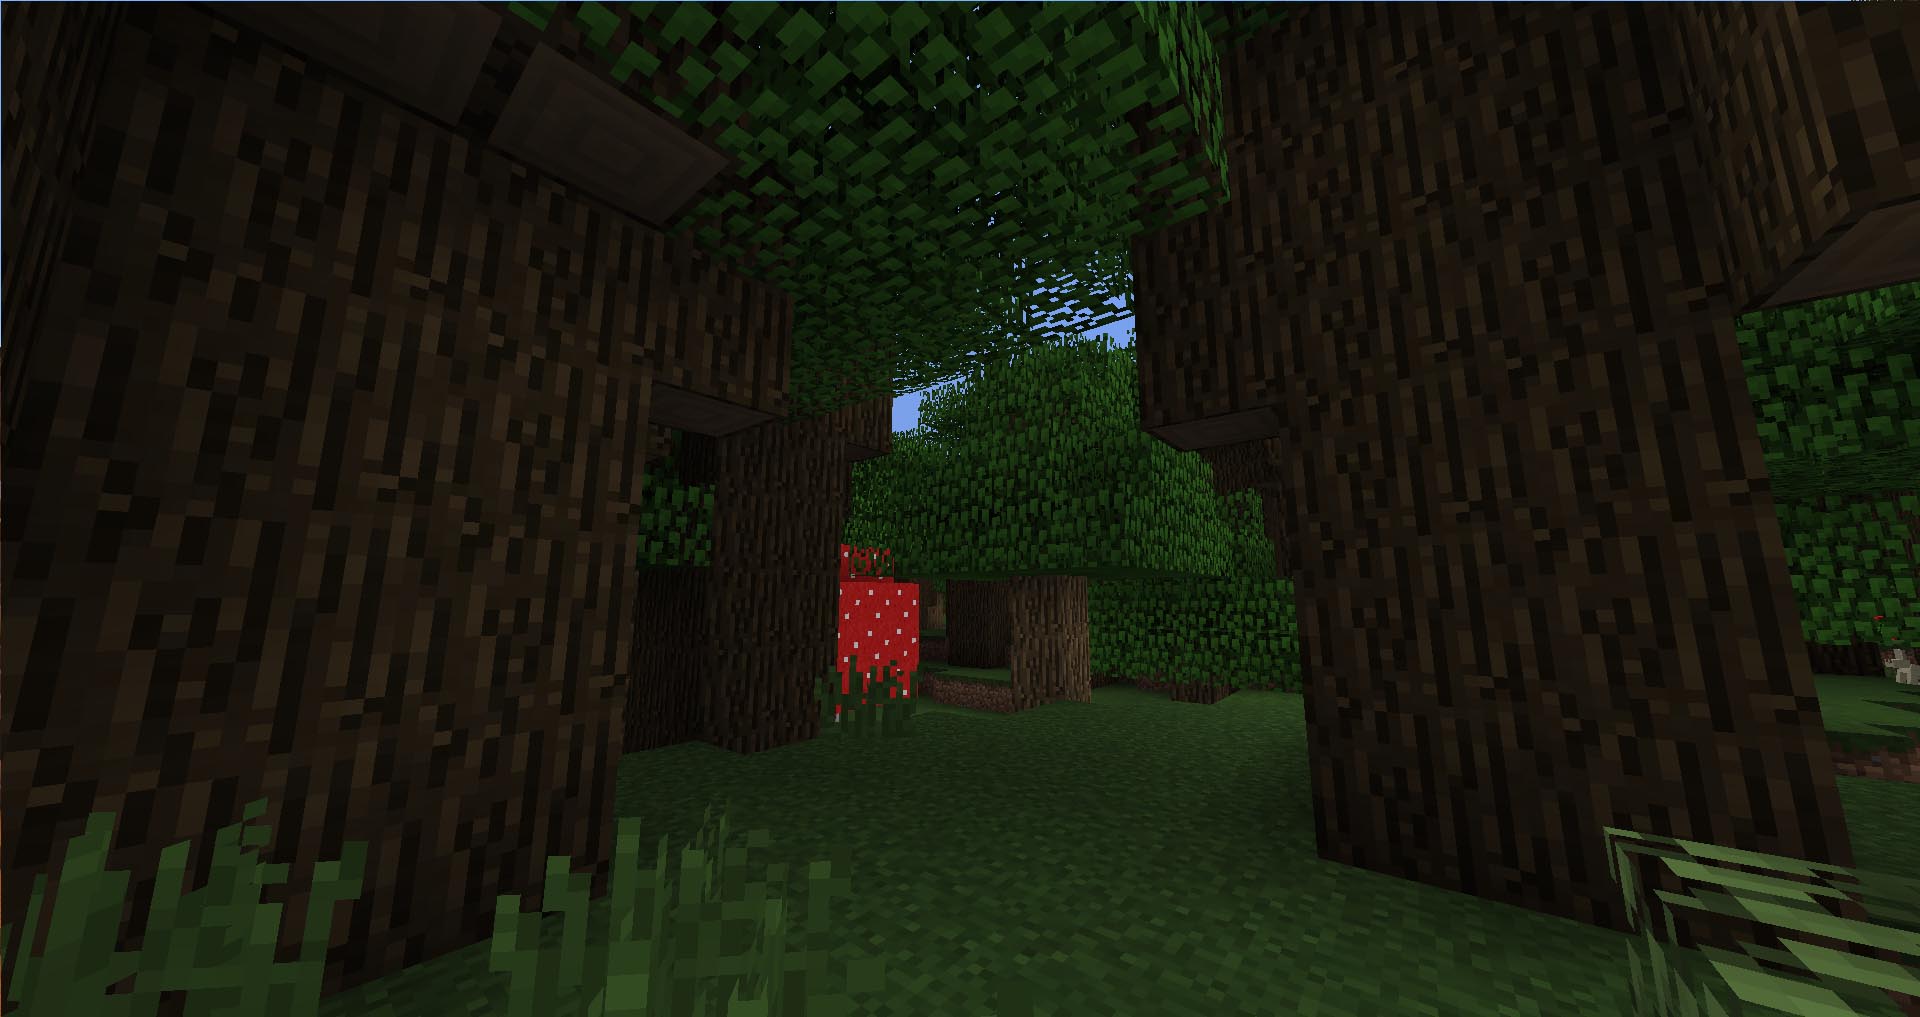 1.7.2 Roofed Forest